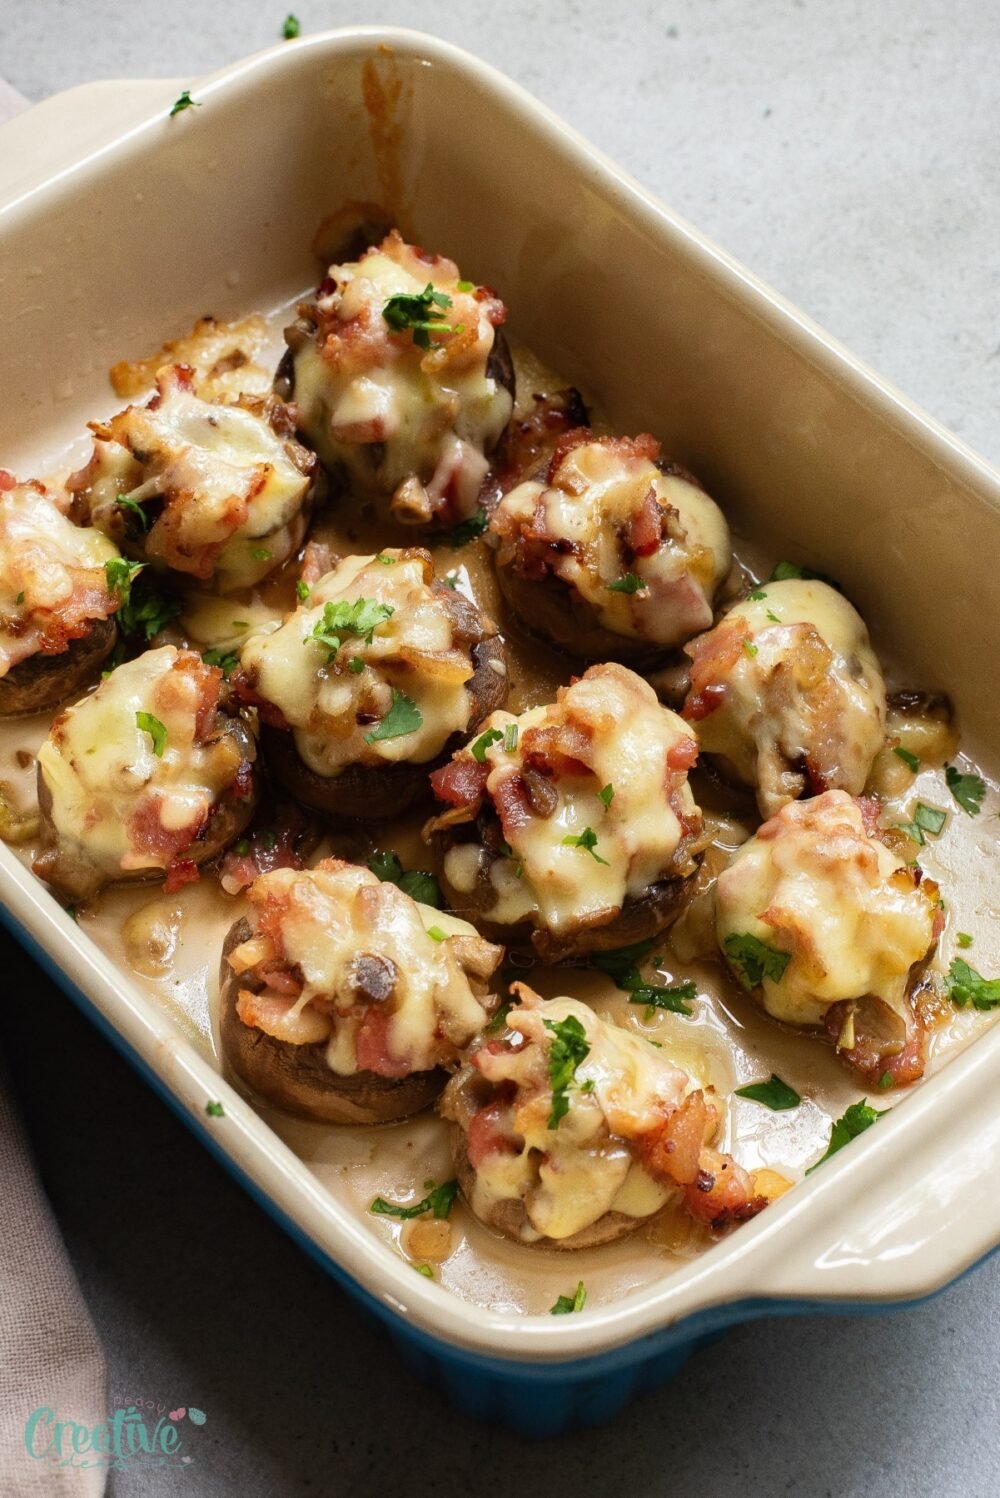 Wow your guests with bacon and cheese filled mushrooms! These flavorful bites combine savory bacon, gooey cheese, and earthy mushrooms. Perfect for any party menu.